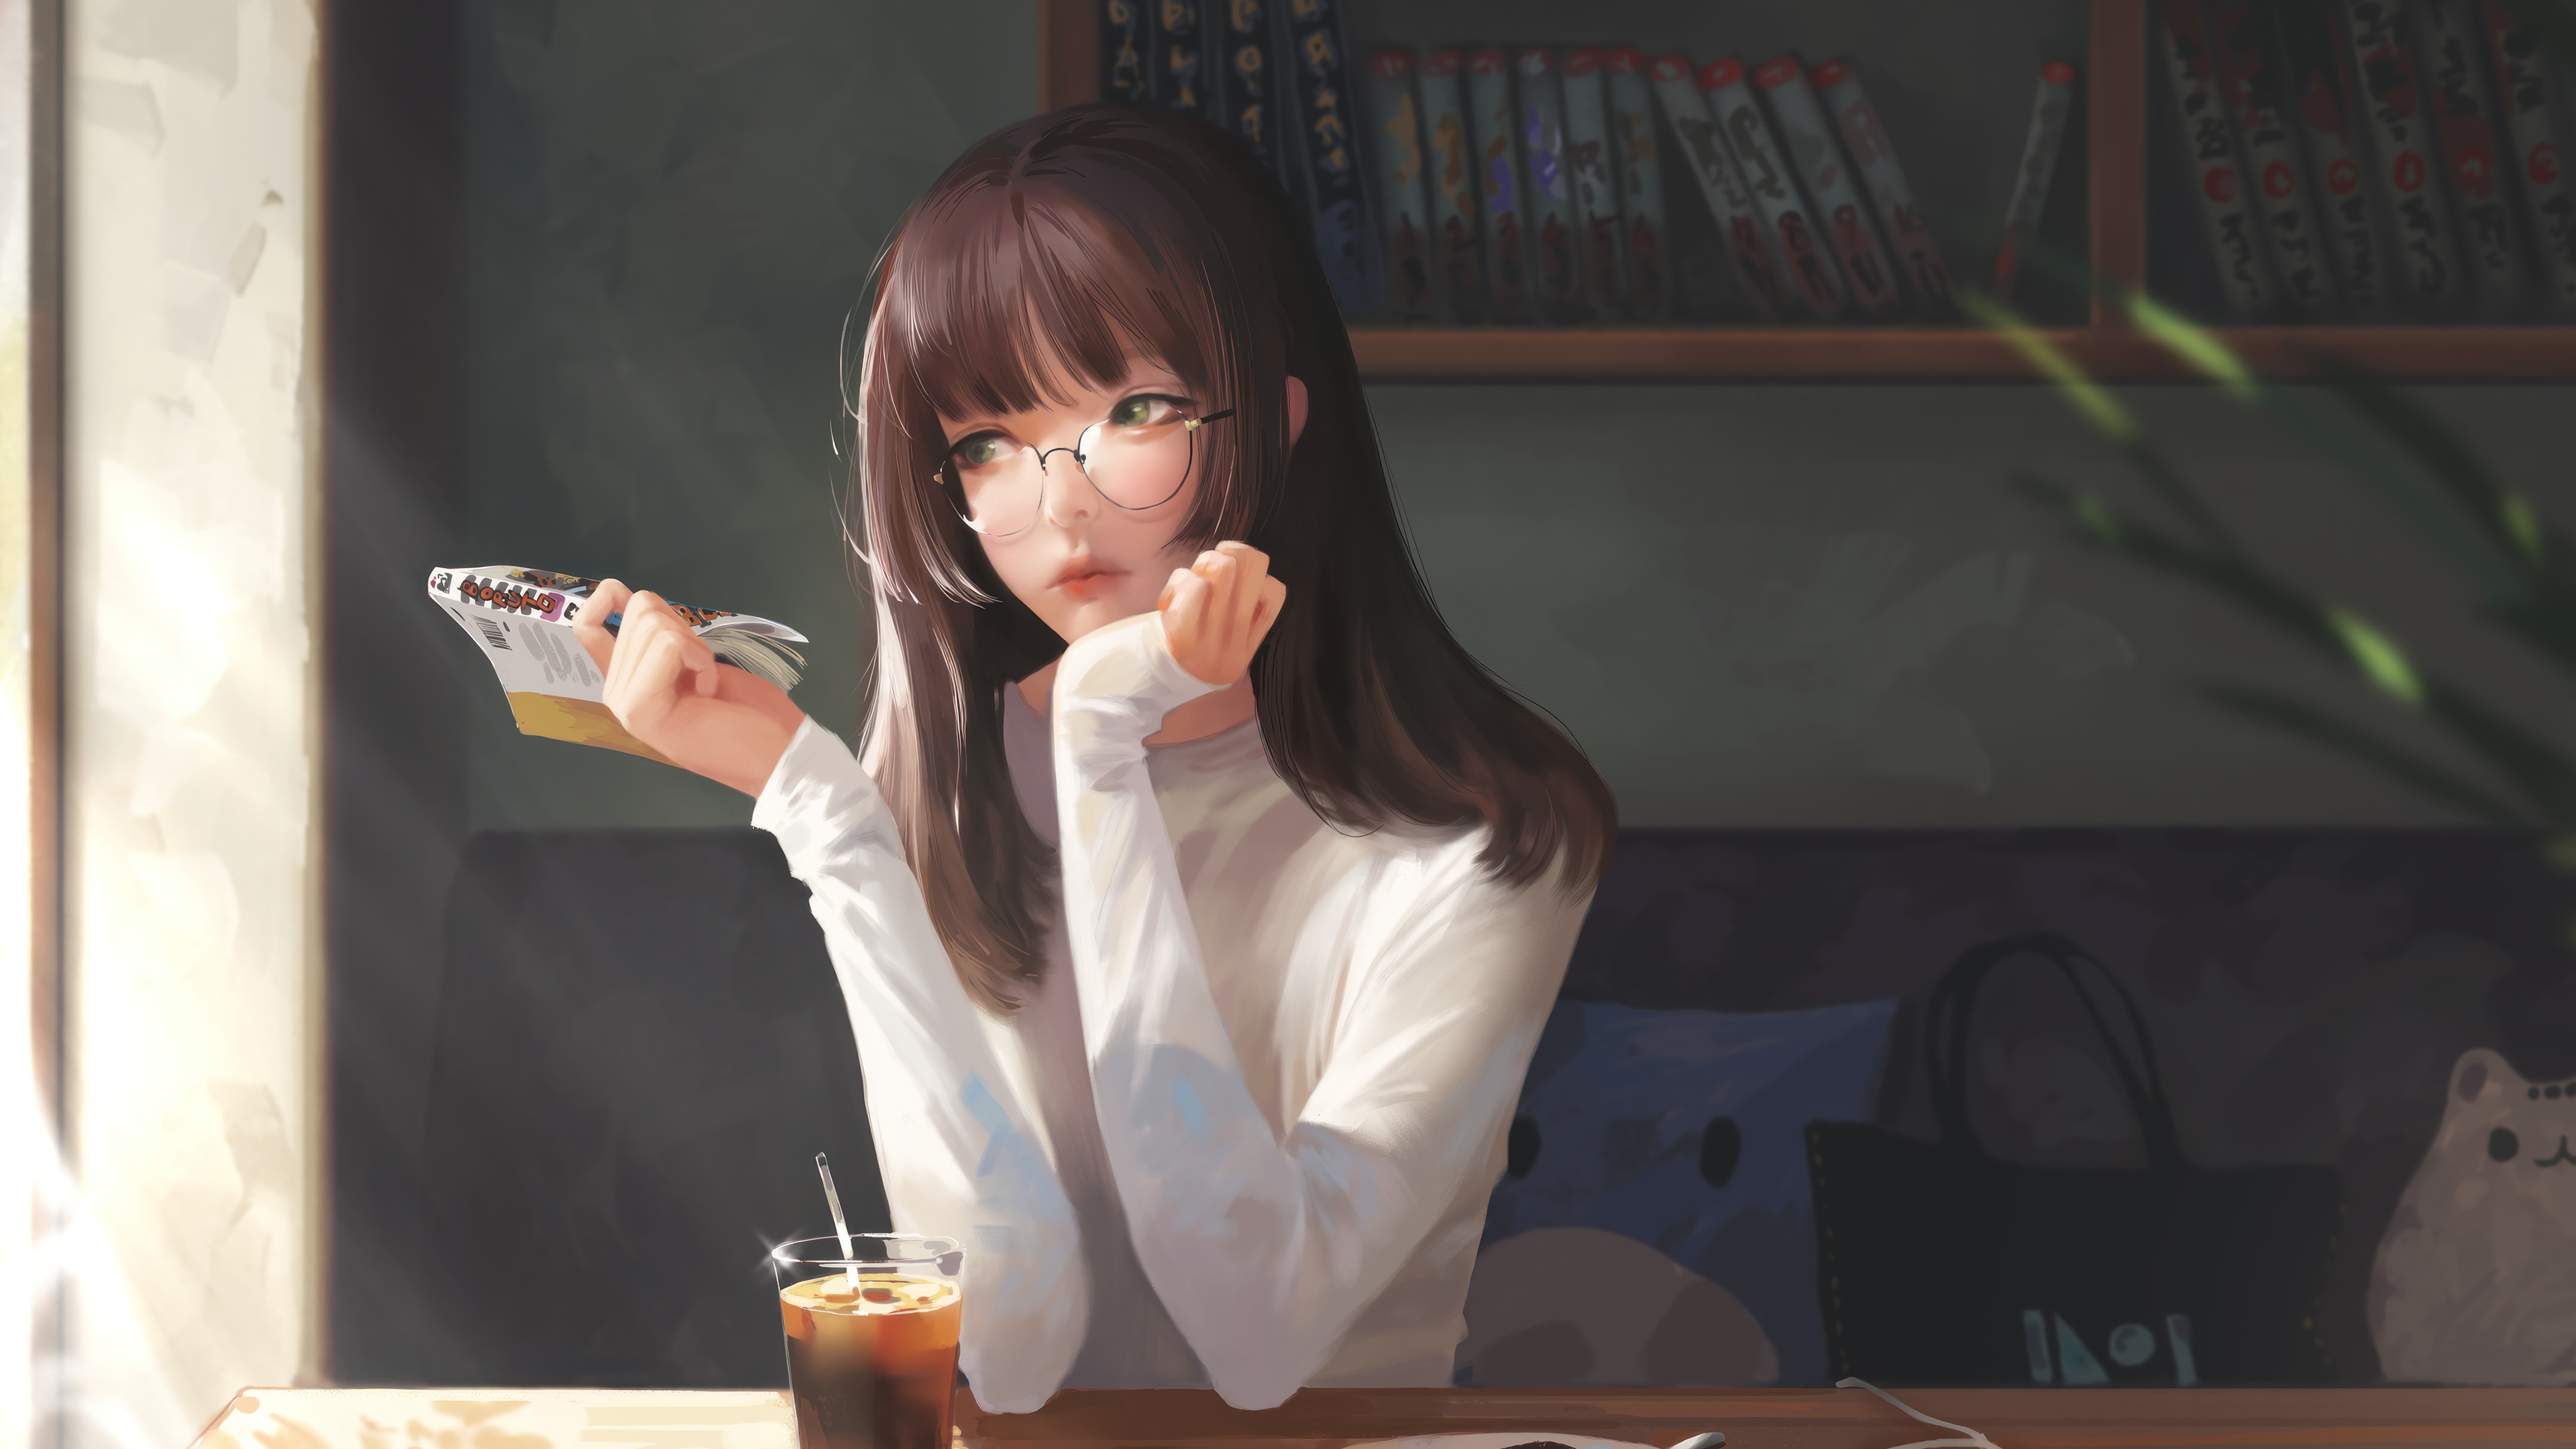 Anime 3840x2160 original characters cafe books brunette looking away glasses anime girls drink